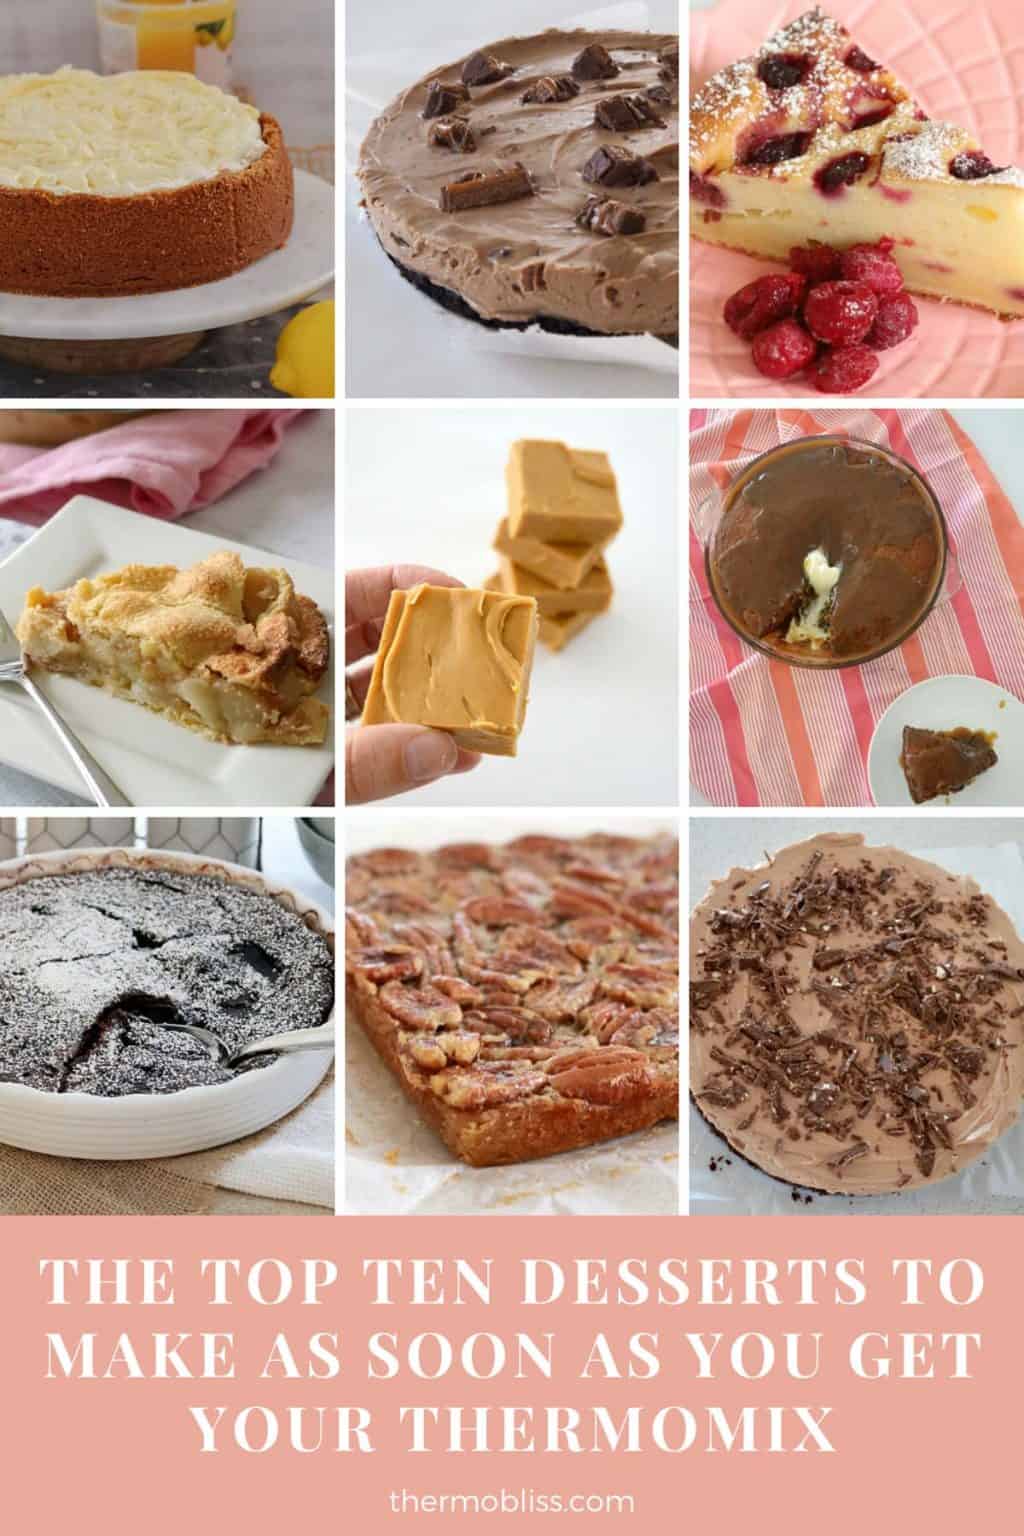 The Top 10 Desserts You Should Make As Soon As You Get Your Thermomix